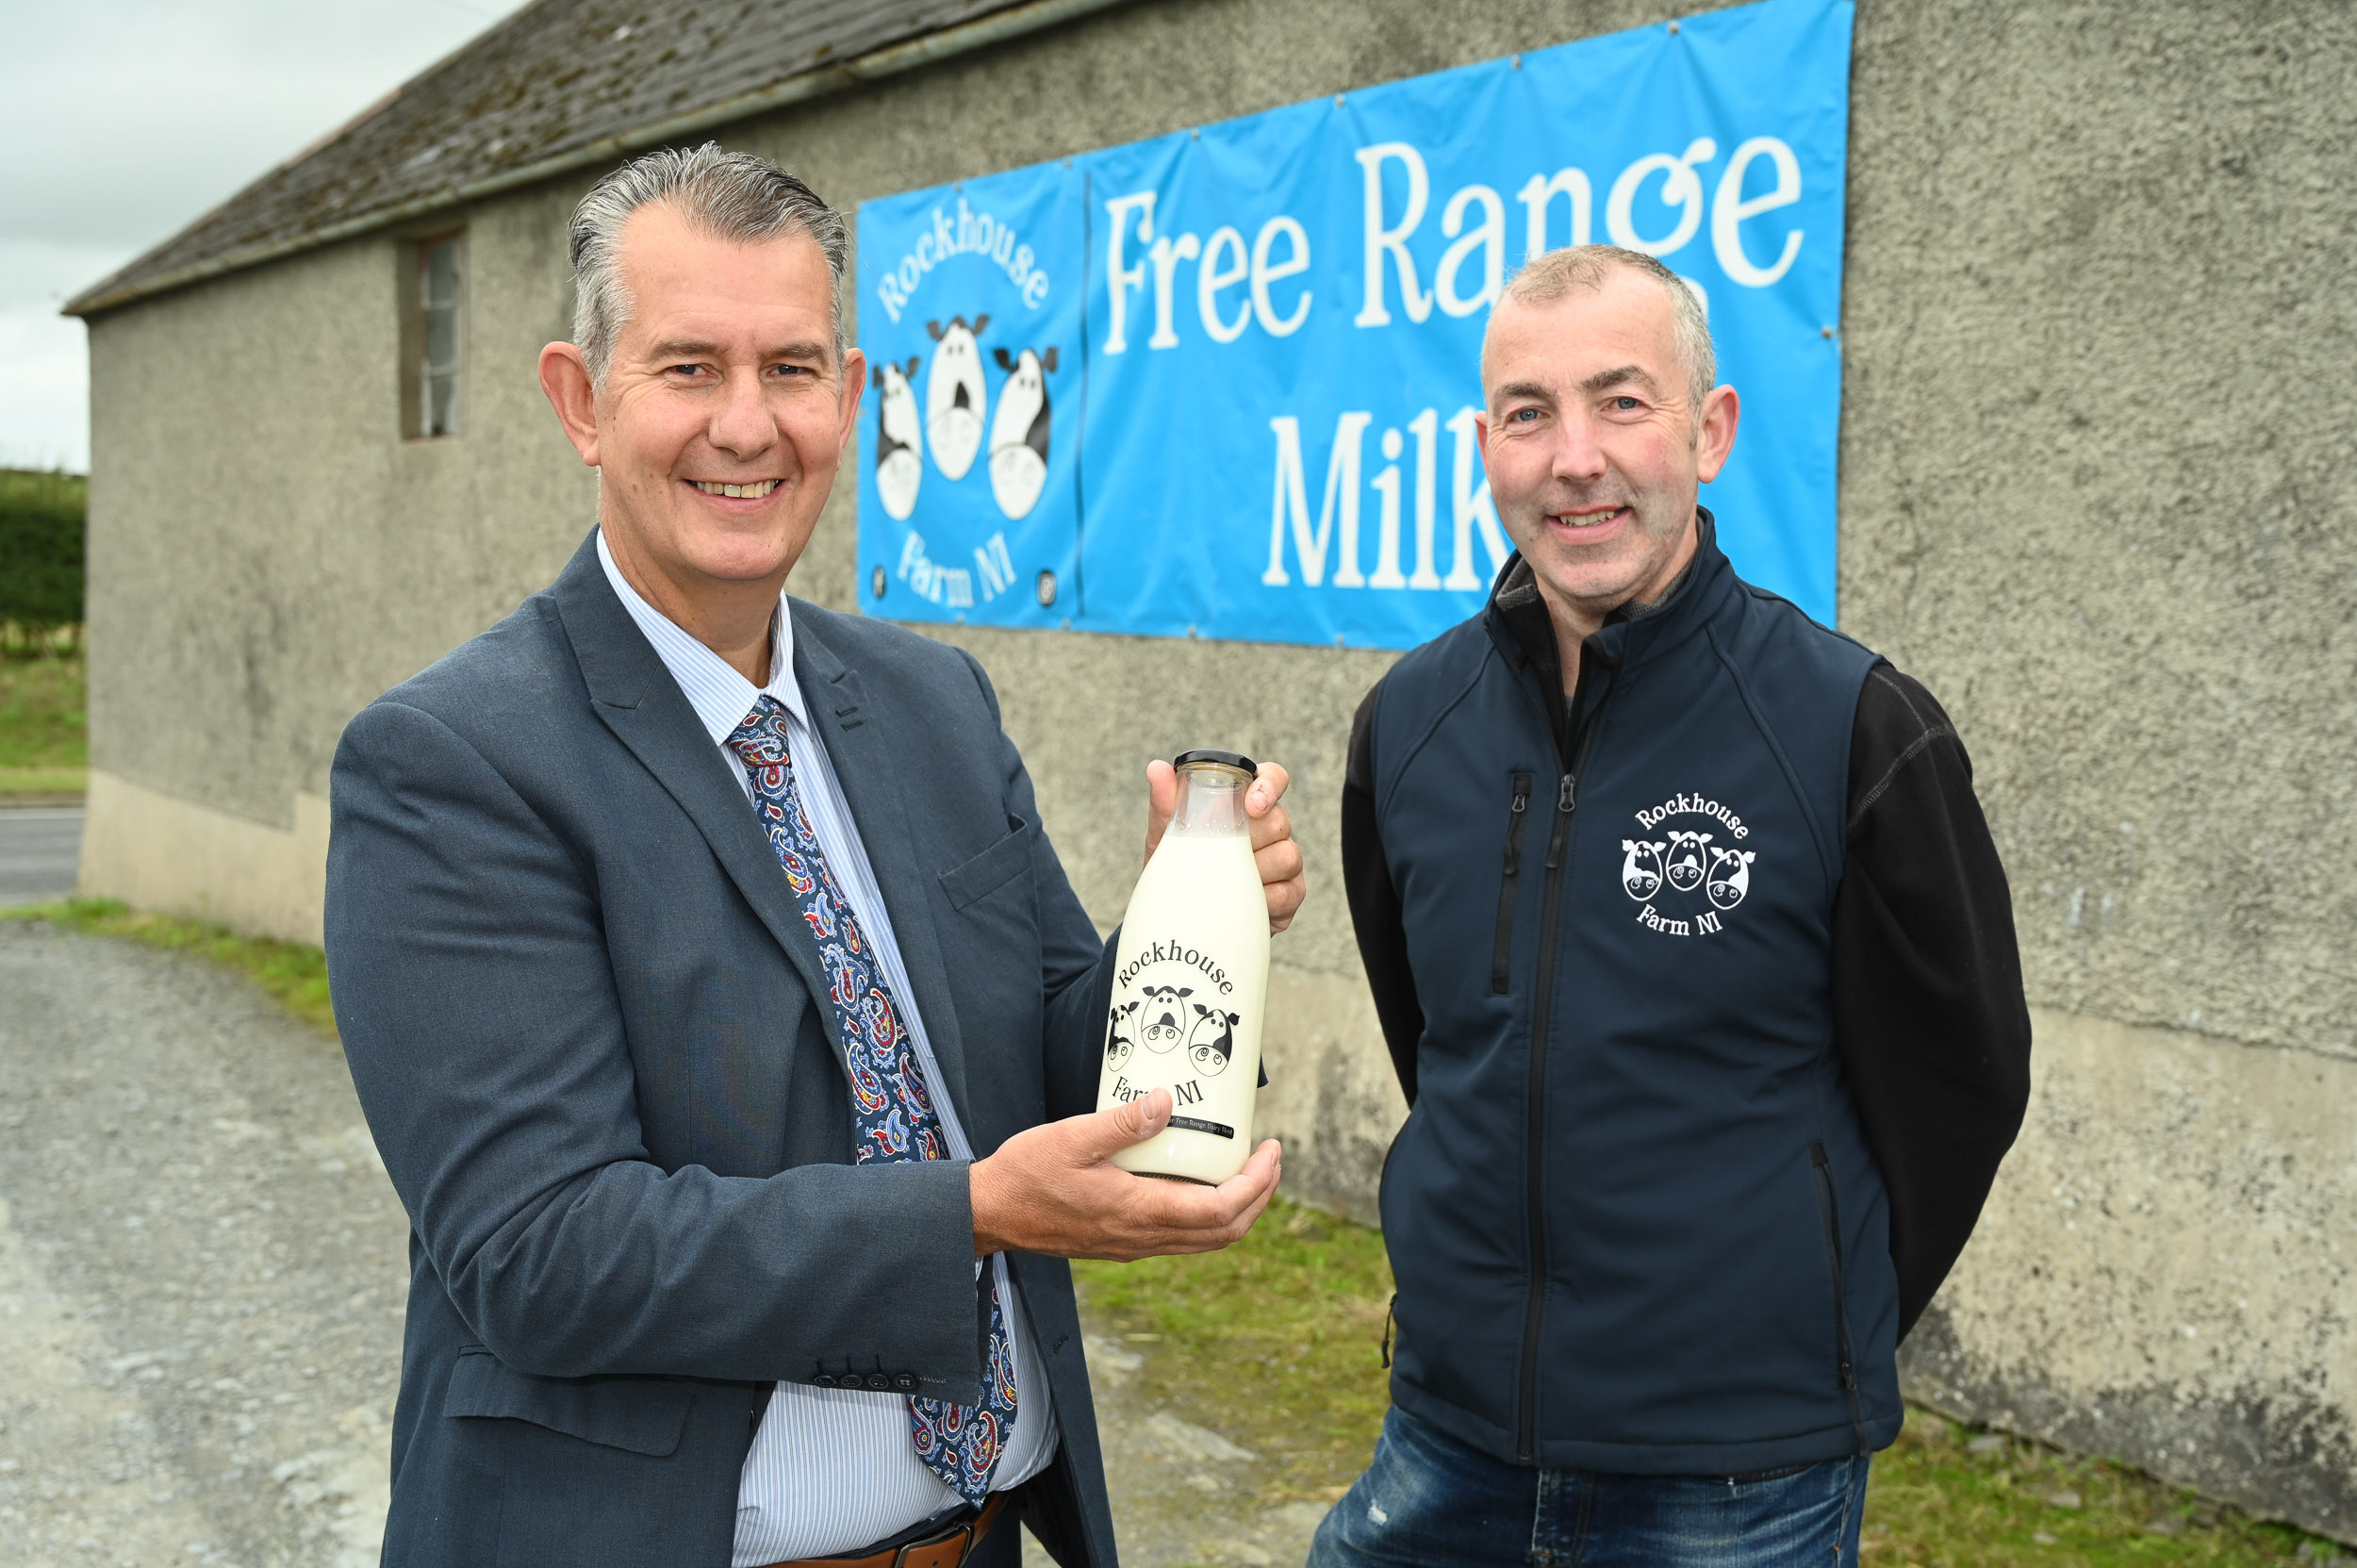 Pasteurised milk in glass bottles – straight from the farm